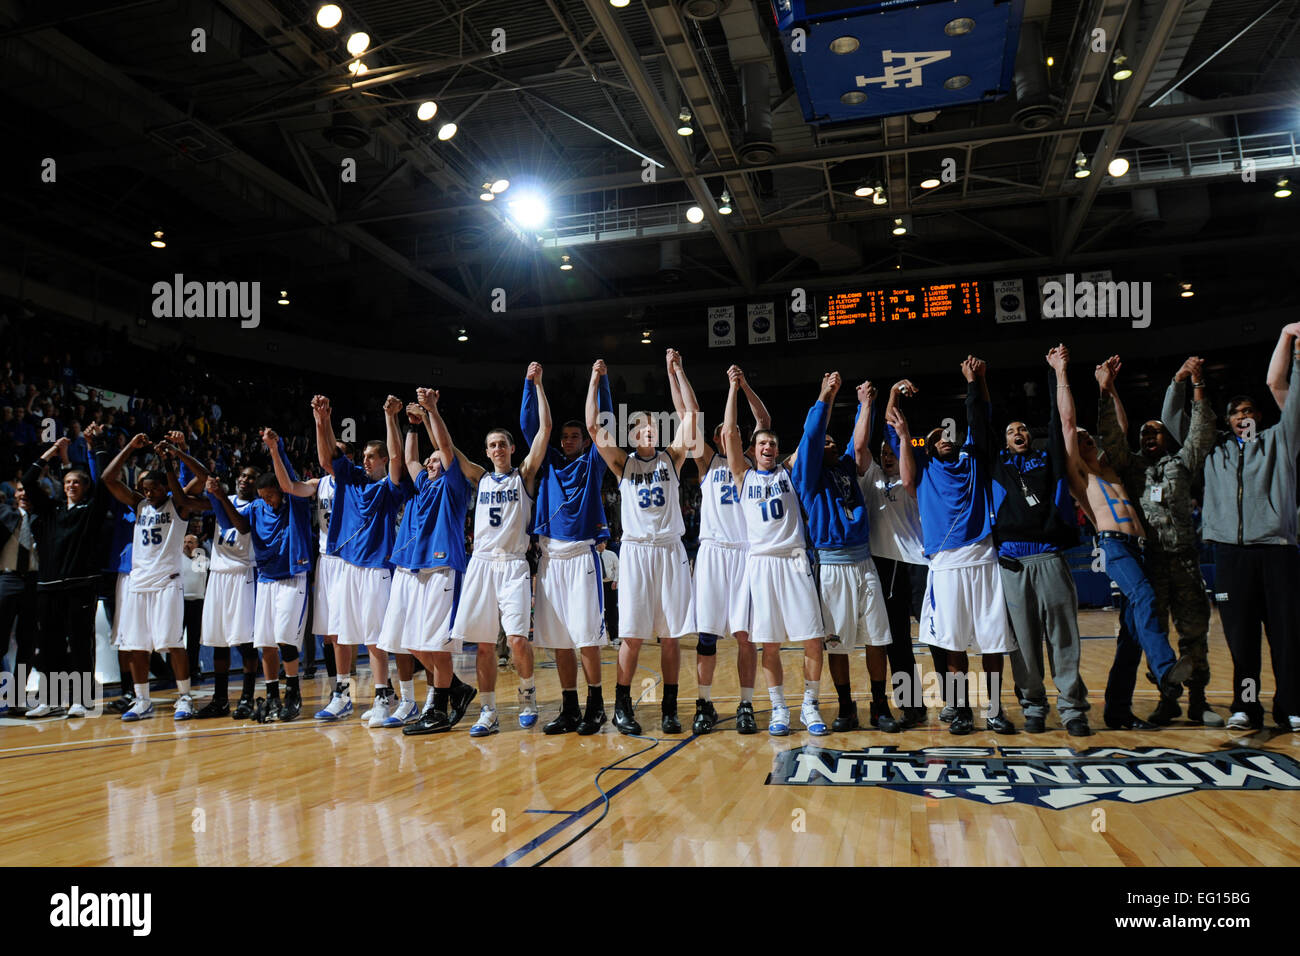 U.S. Air Force Academy, CO- Members of the Falcons and fans raise their hands in celebration of their win over the Wyoming Cowboys at Clune Arena 30 Jan. They won 70-63. This win broke a 22-game conference losing streak for the Falcons; their first win in the Mountain West Conference since March 5, 2008.  J. Rachel Spencer Stock Photo